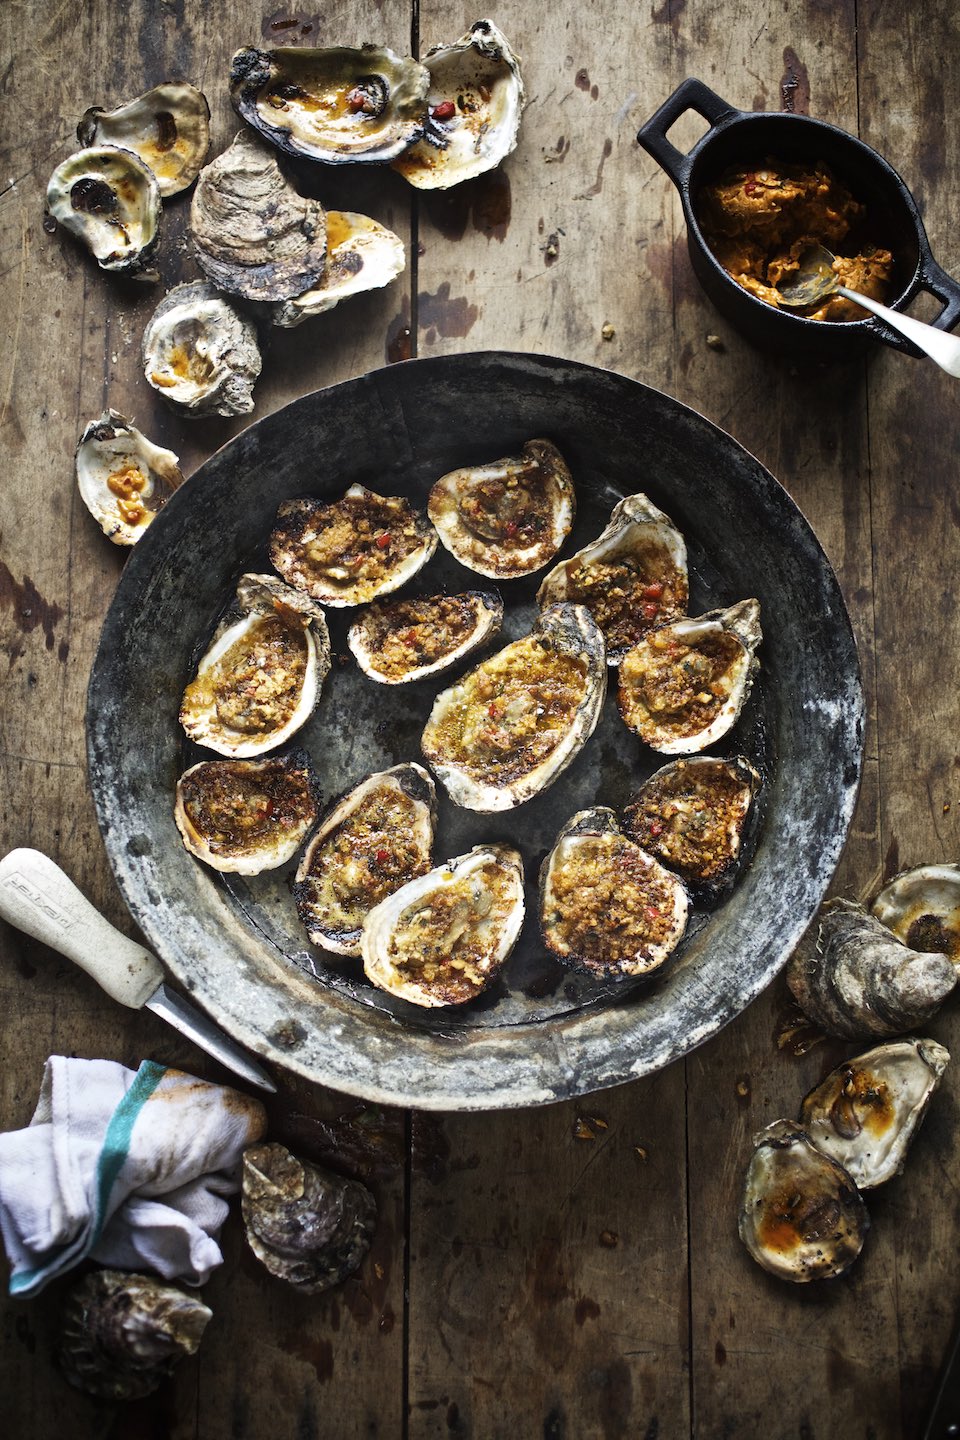 Grilled, half-shell oysters presented in a rustic, metal bowl.